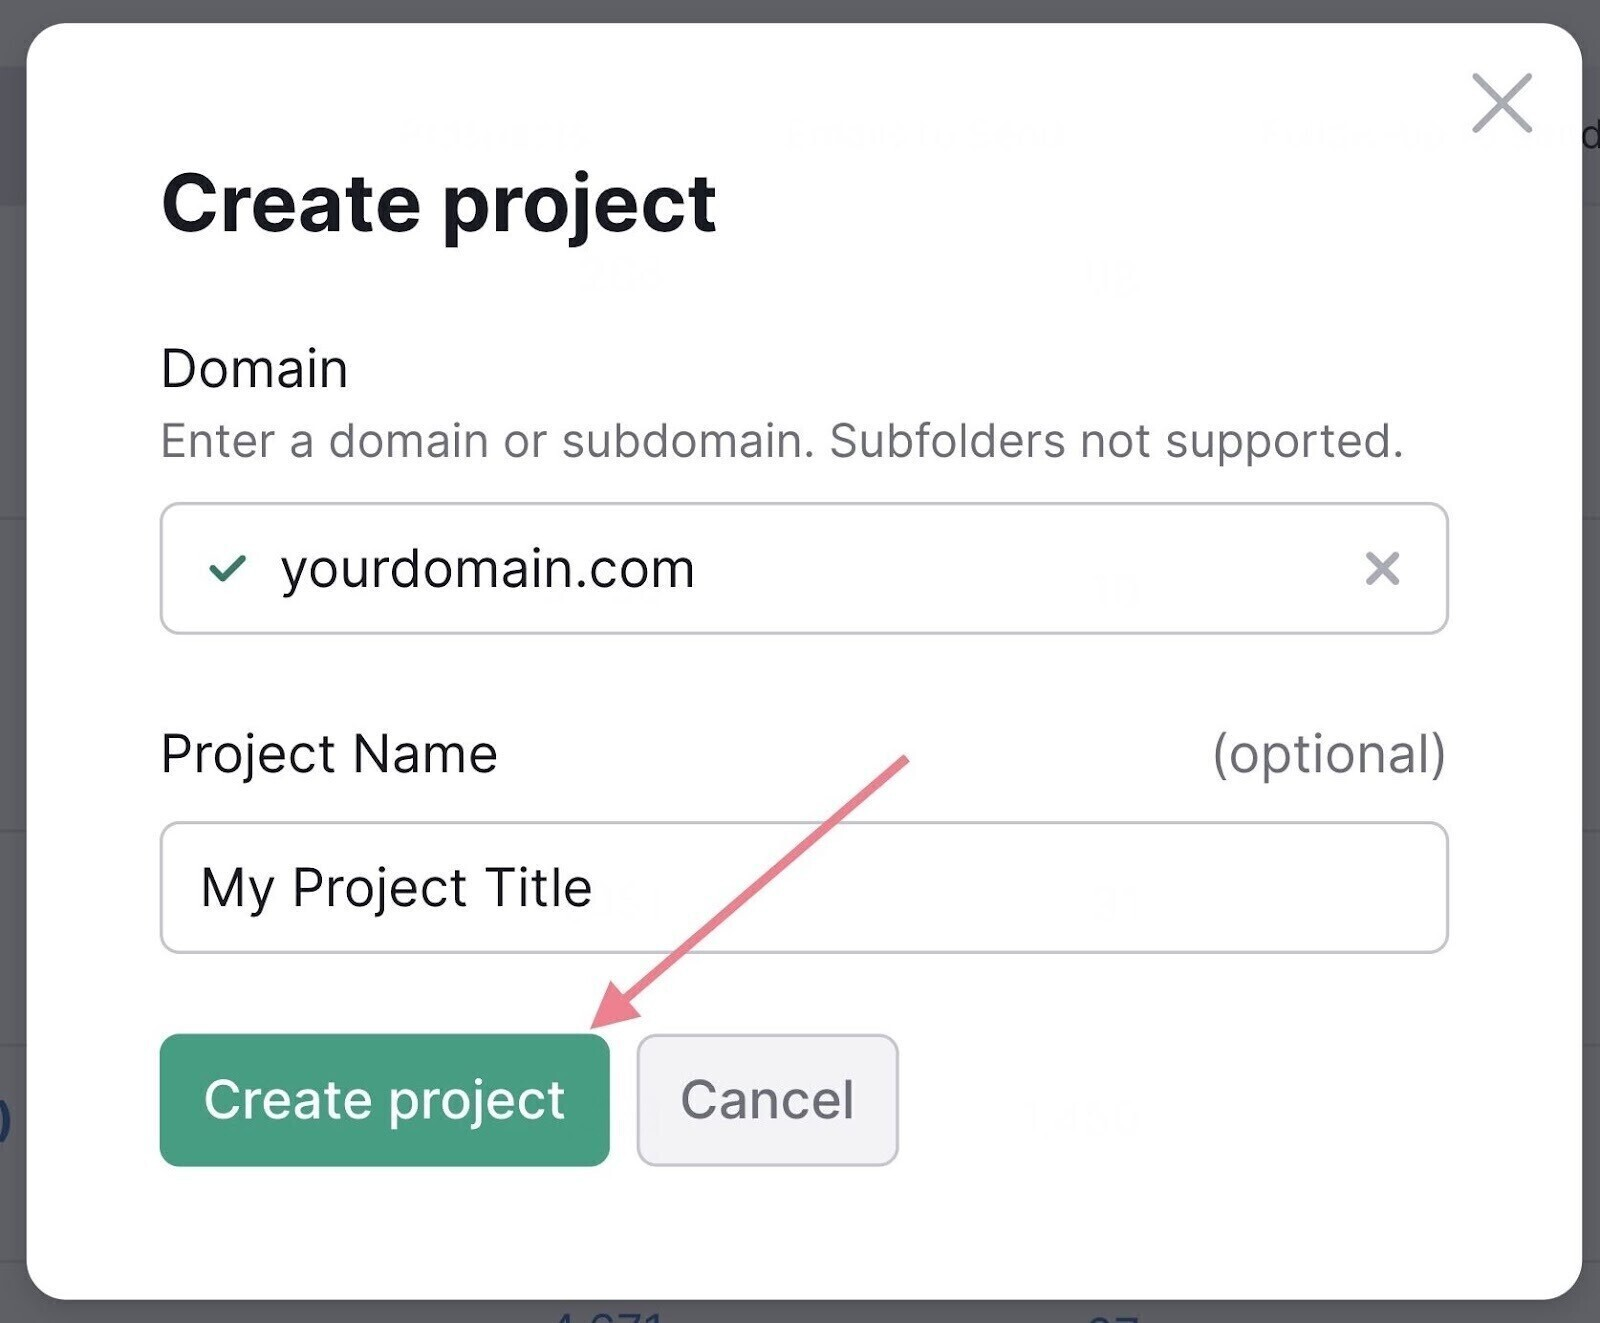 "Create project" pop-up window in Link Building Tool